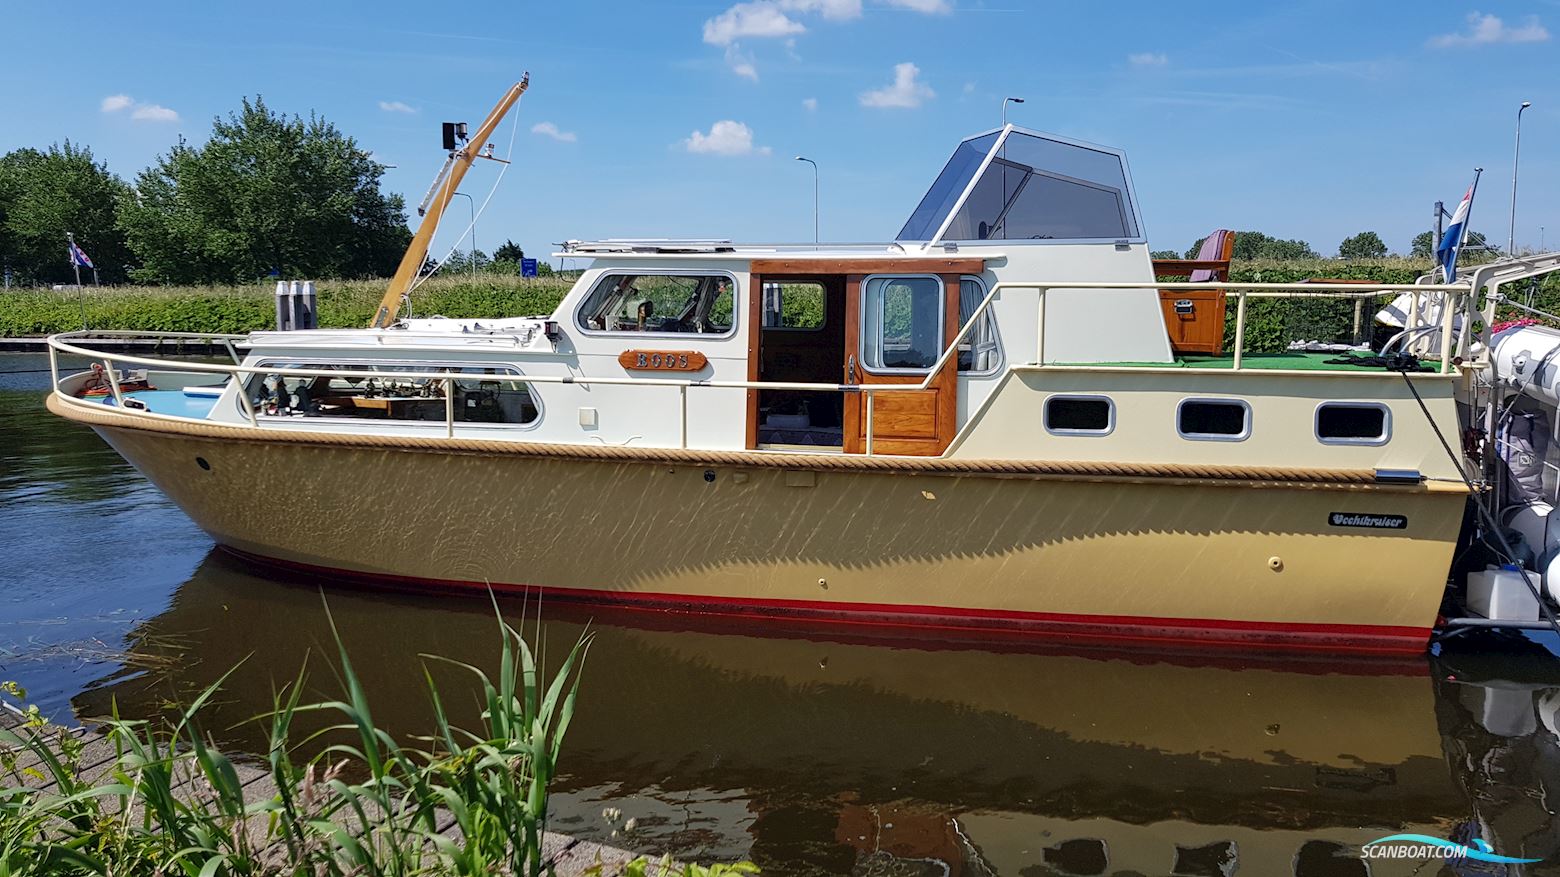 Vechtkruiser 1060 AK Motor boat 1980, with Allpa Sole engine, The Netherlands